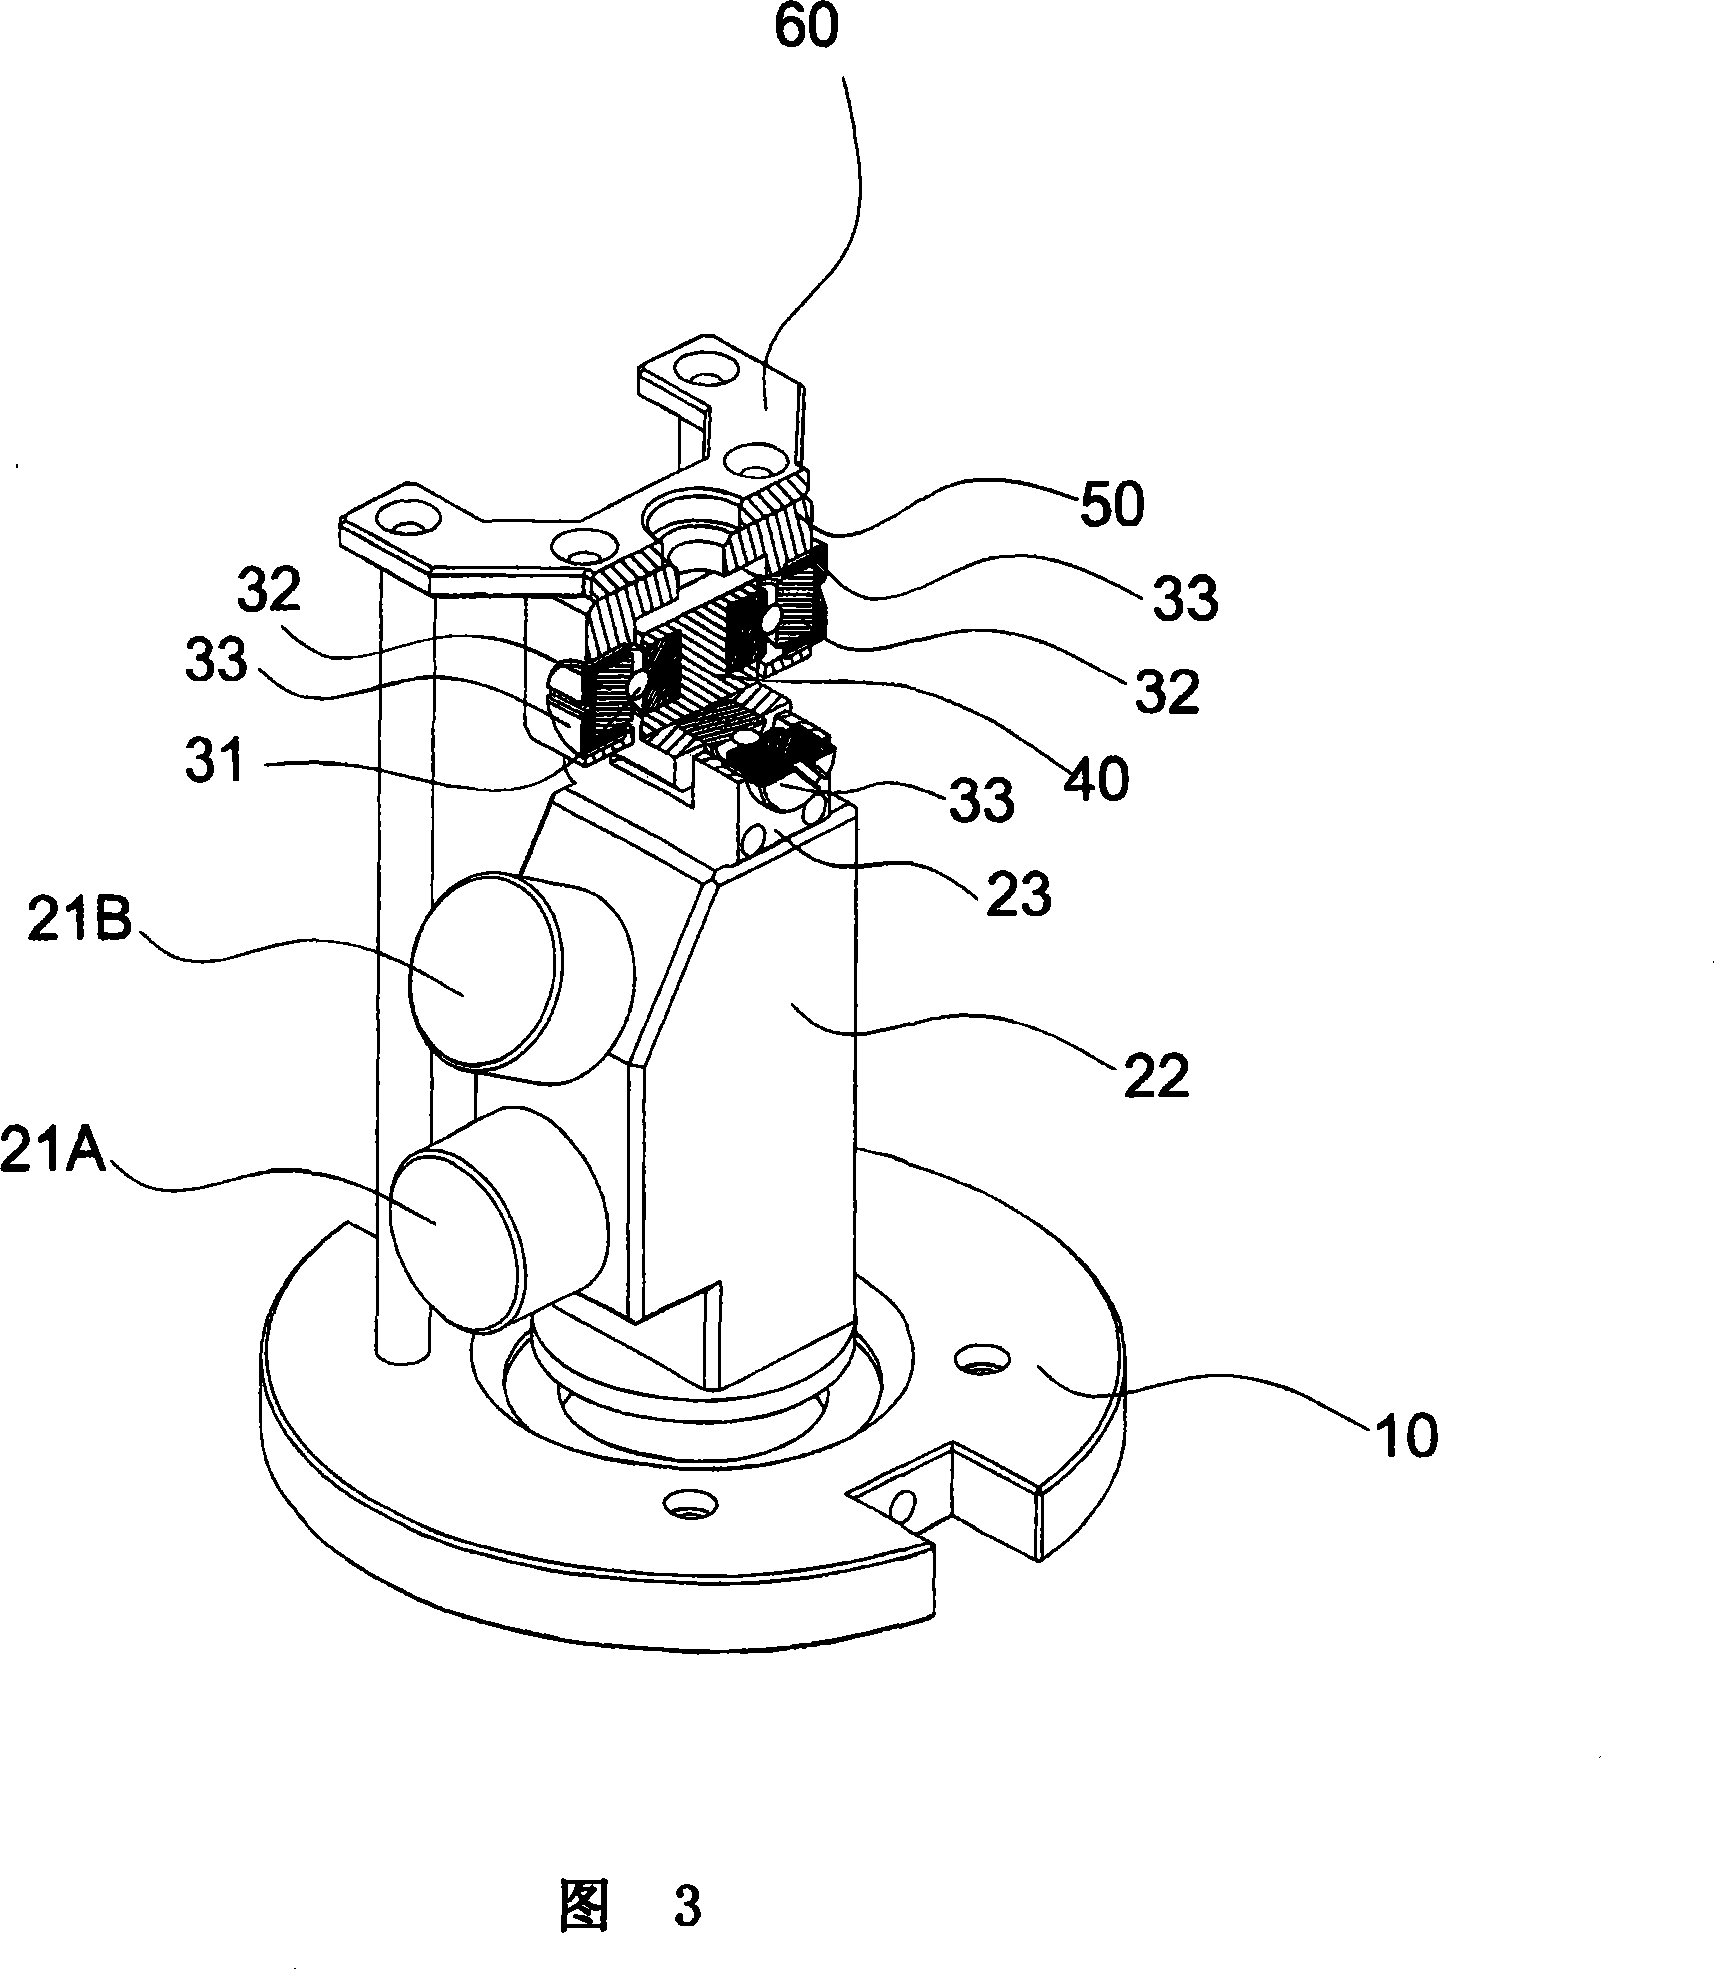 Axial direction free spin device